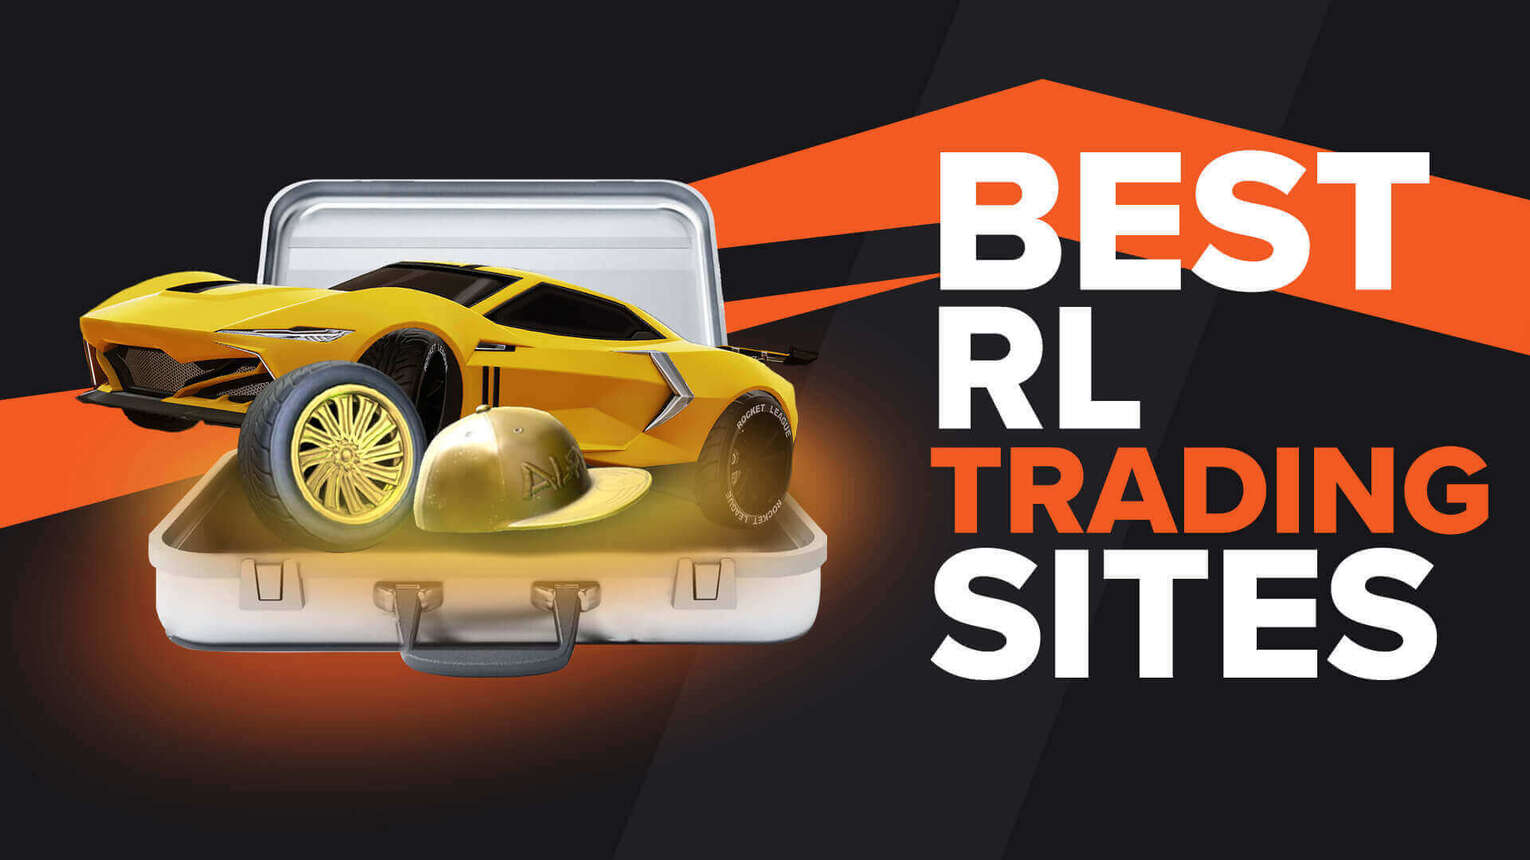 Best Trading Website to get new Rocket League Items [2022]